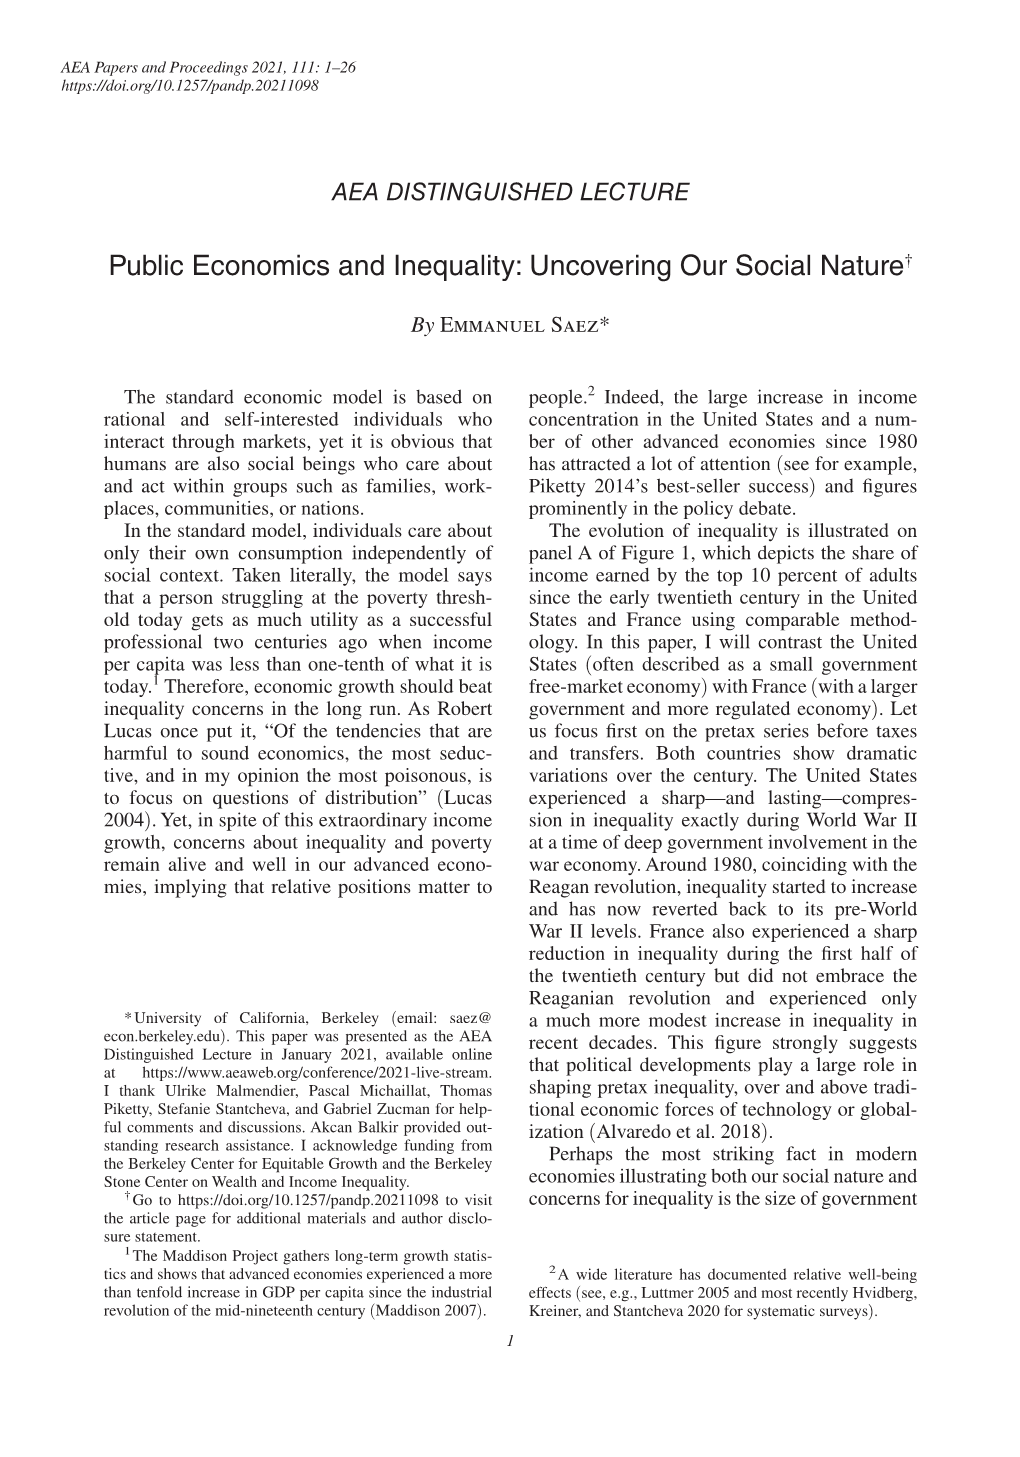 Public Economics and Inequality: Uncovering Our Social Nature†